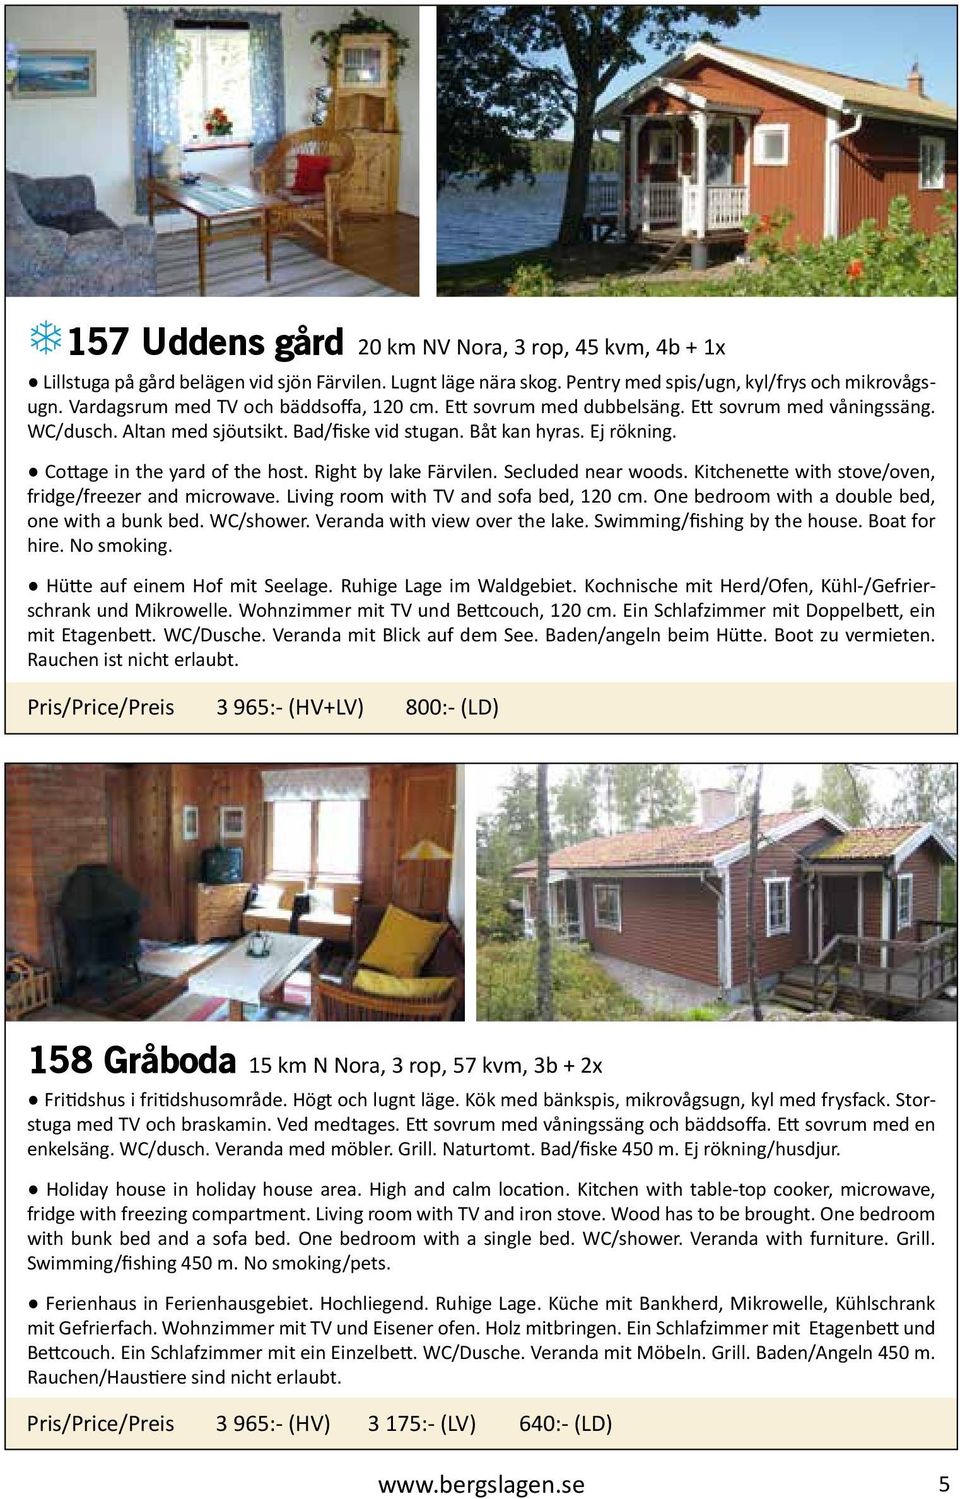 Cottage in the yard of the host. Right by lake Färvilen. Secluded near woods. Kitchenette with stove/oven, fridge/freezer and microwave. Living room with TV and sofa bed, 120 cm.